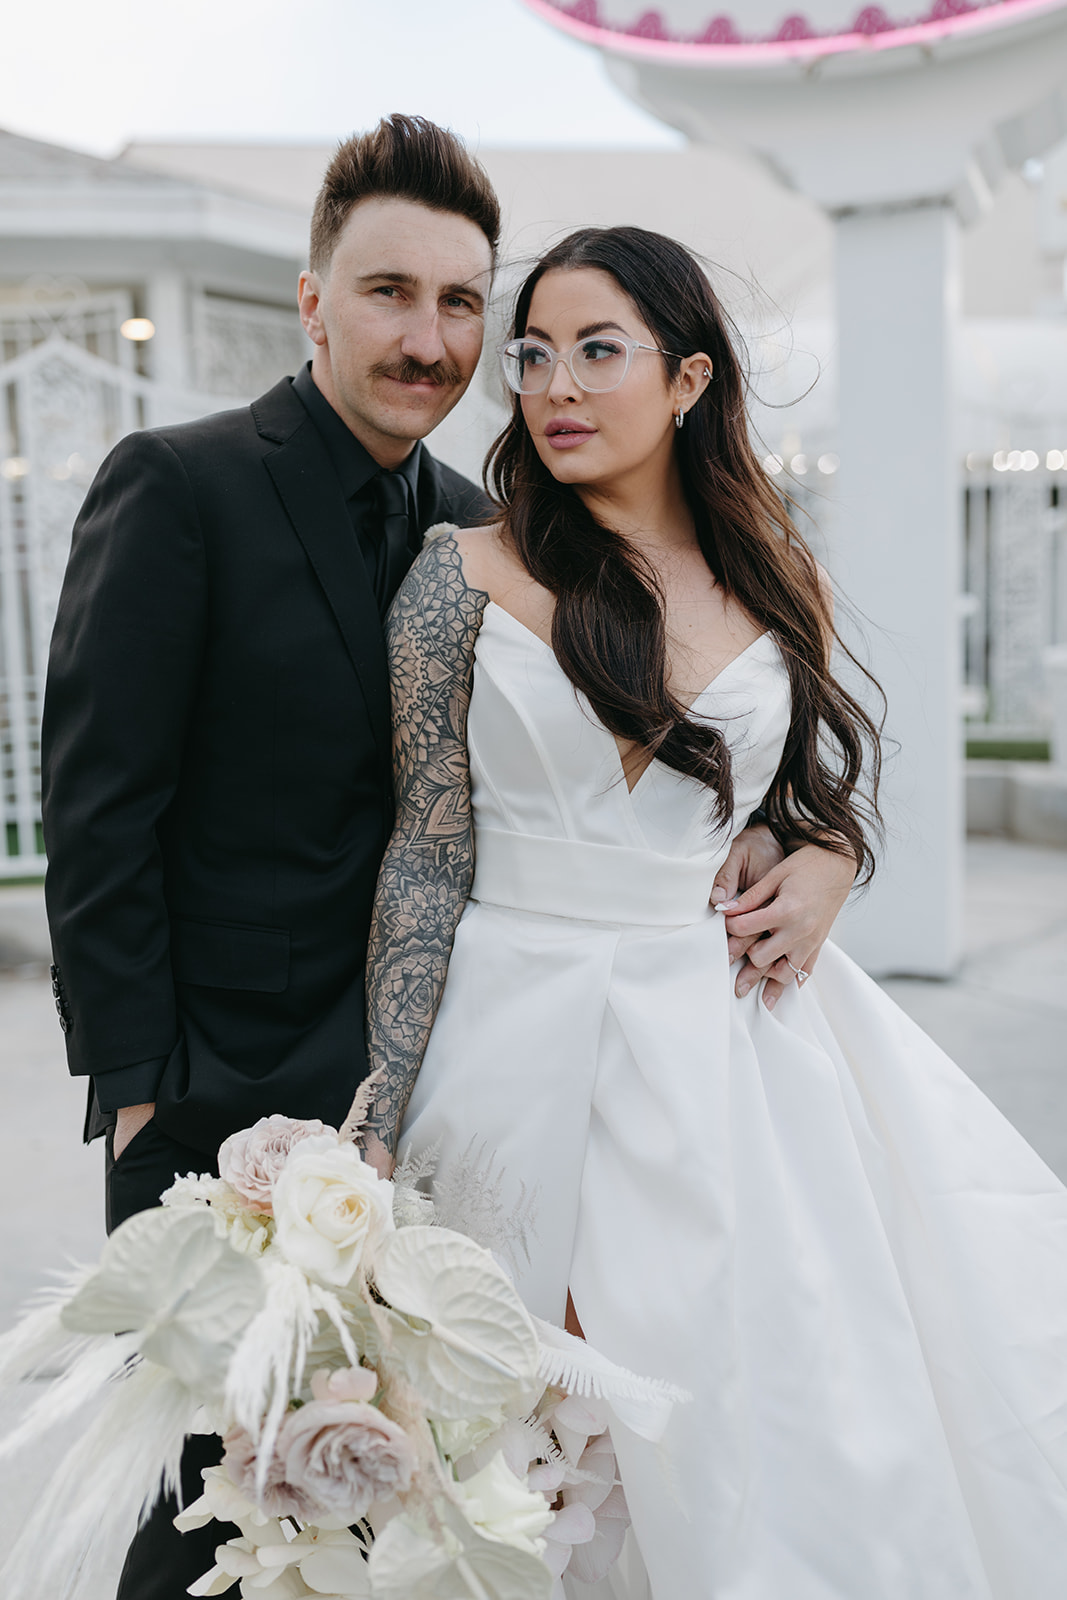 Groom in All Black Suite and Bride in White Dress and Neutral Toned Bouquet in Las Vegas 